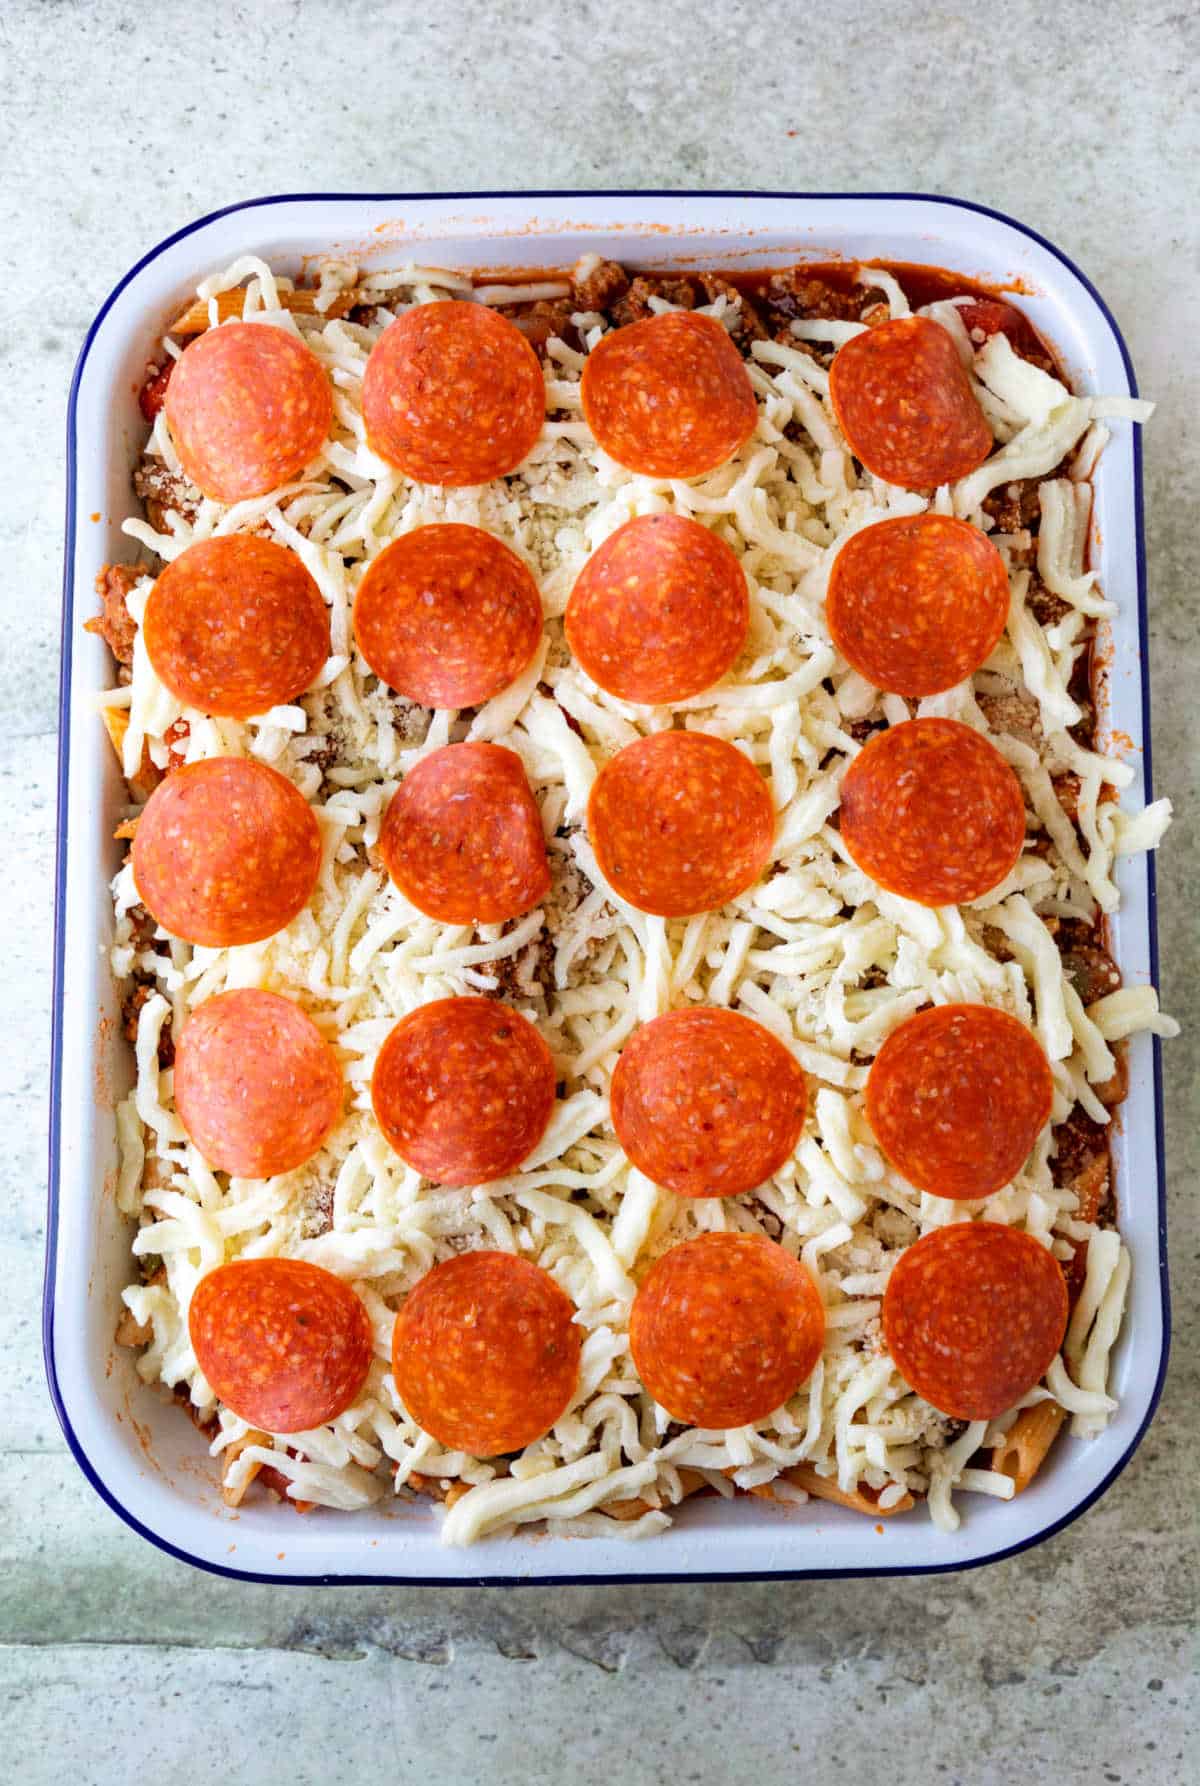 Unbaked pizza pasta in a baking pan.